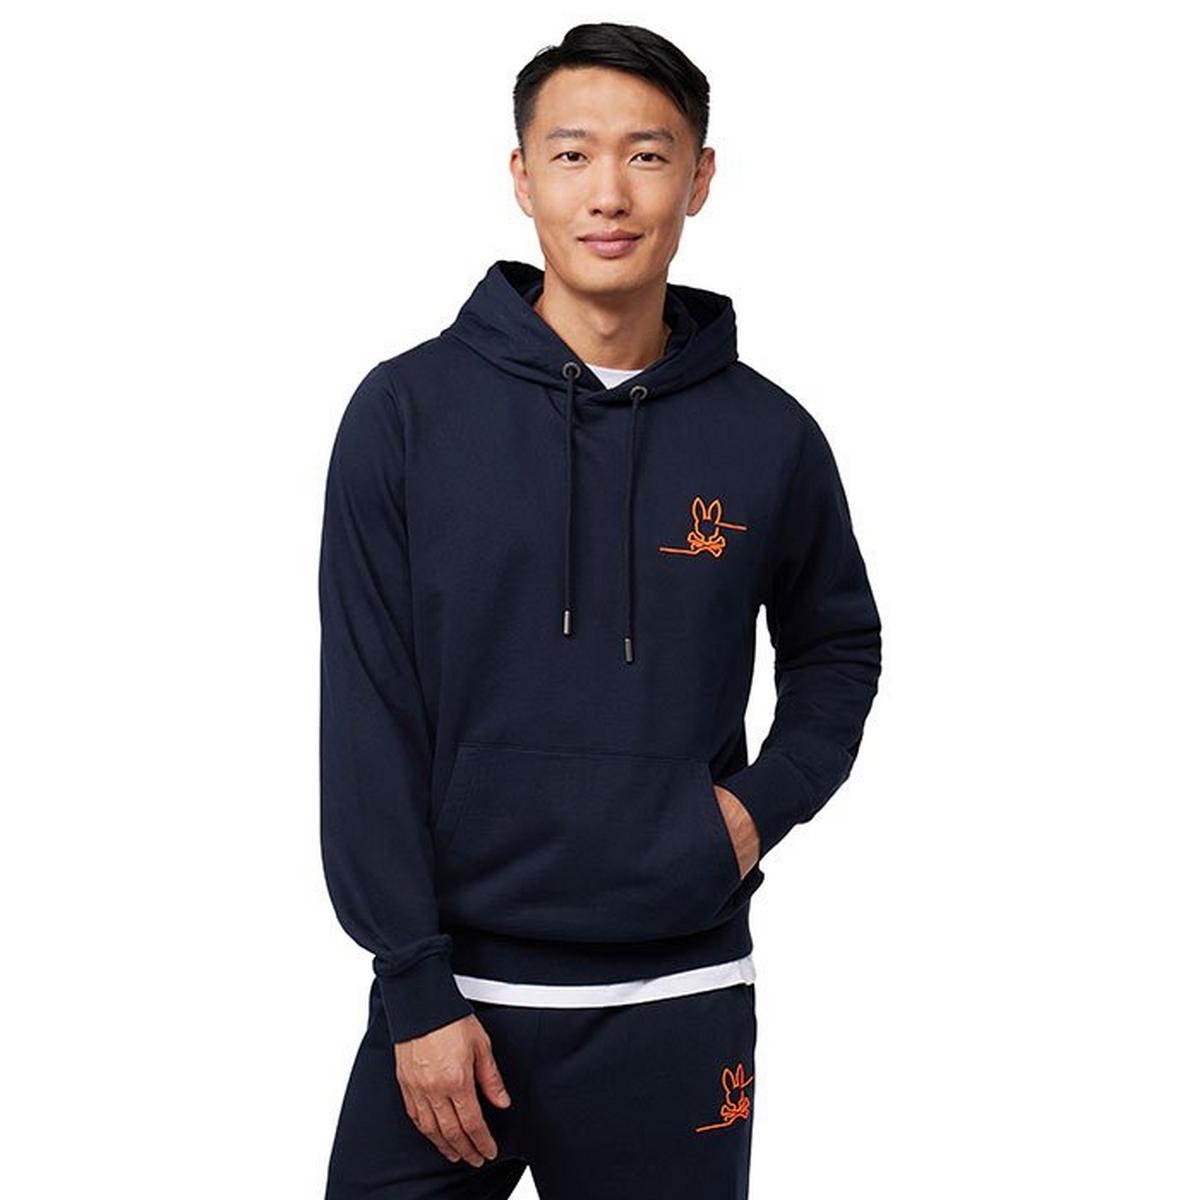 Men's Chester Embroidered Hoodie